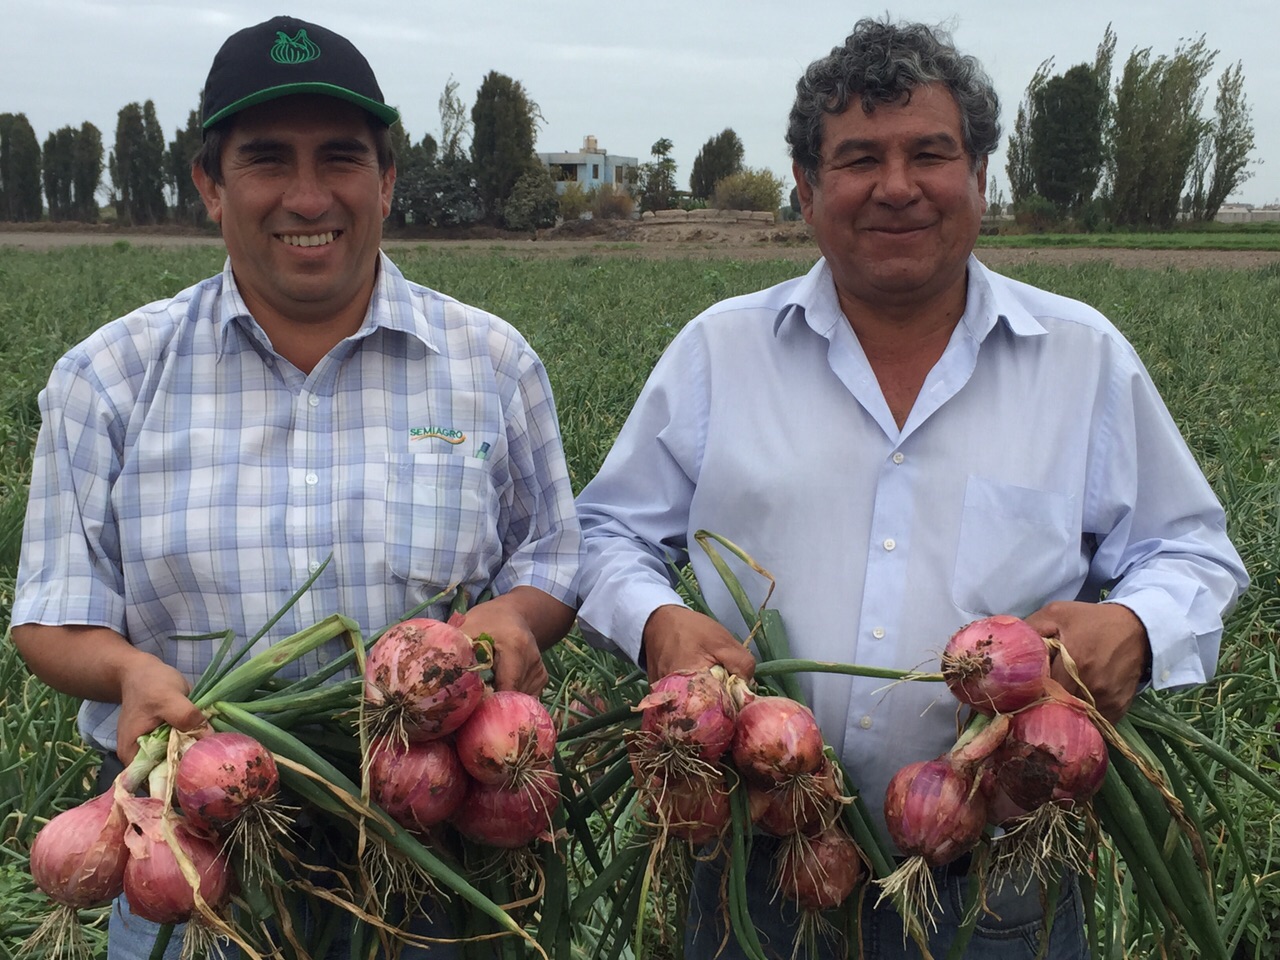 High quality and high yield, the golden combination for Hazera onions